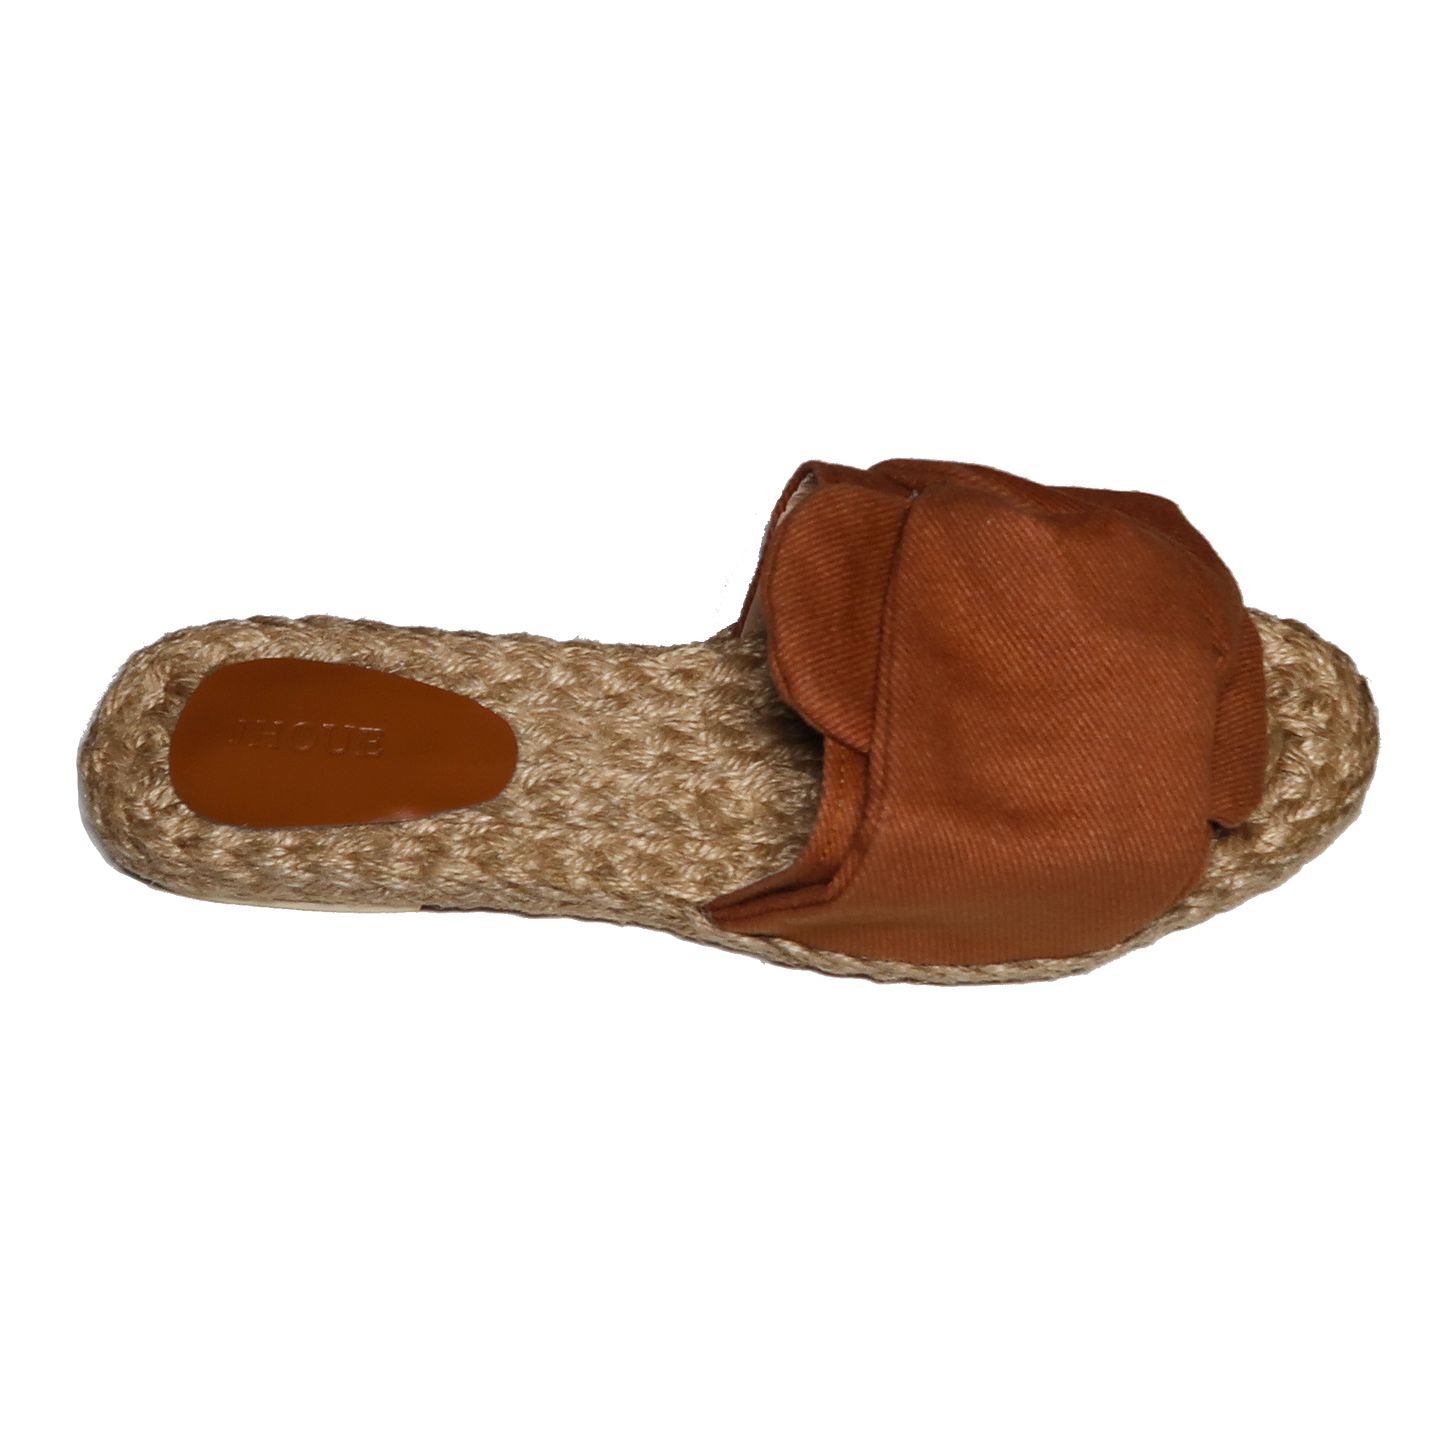 Handmade Abaca Footbed Tan Canvas Tie Knot Strap Slides Sandals Slippers Flats Semi Pointed Toe